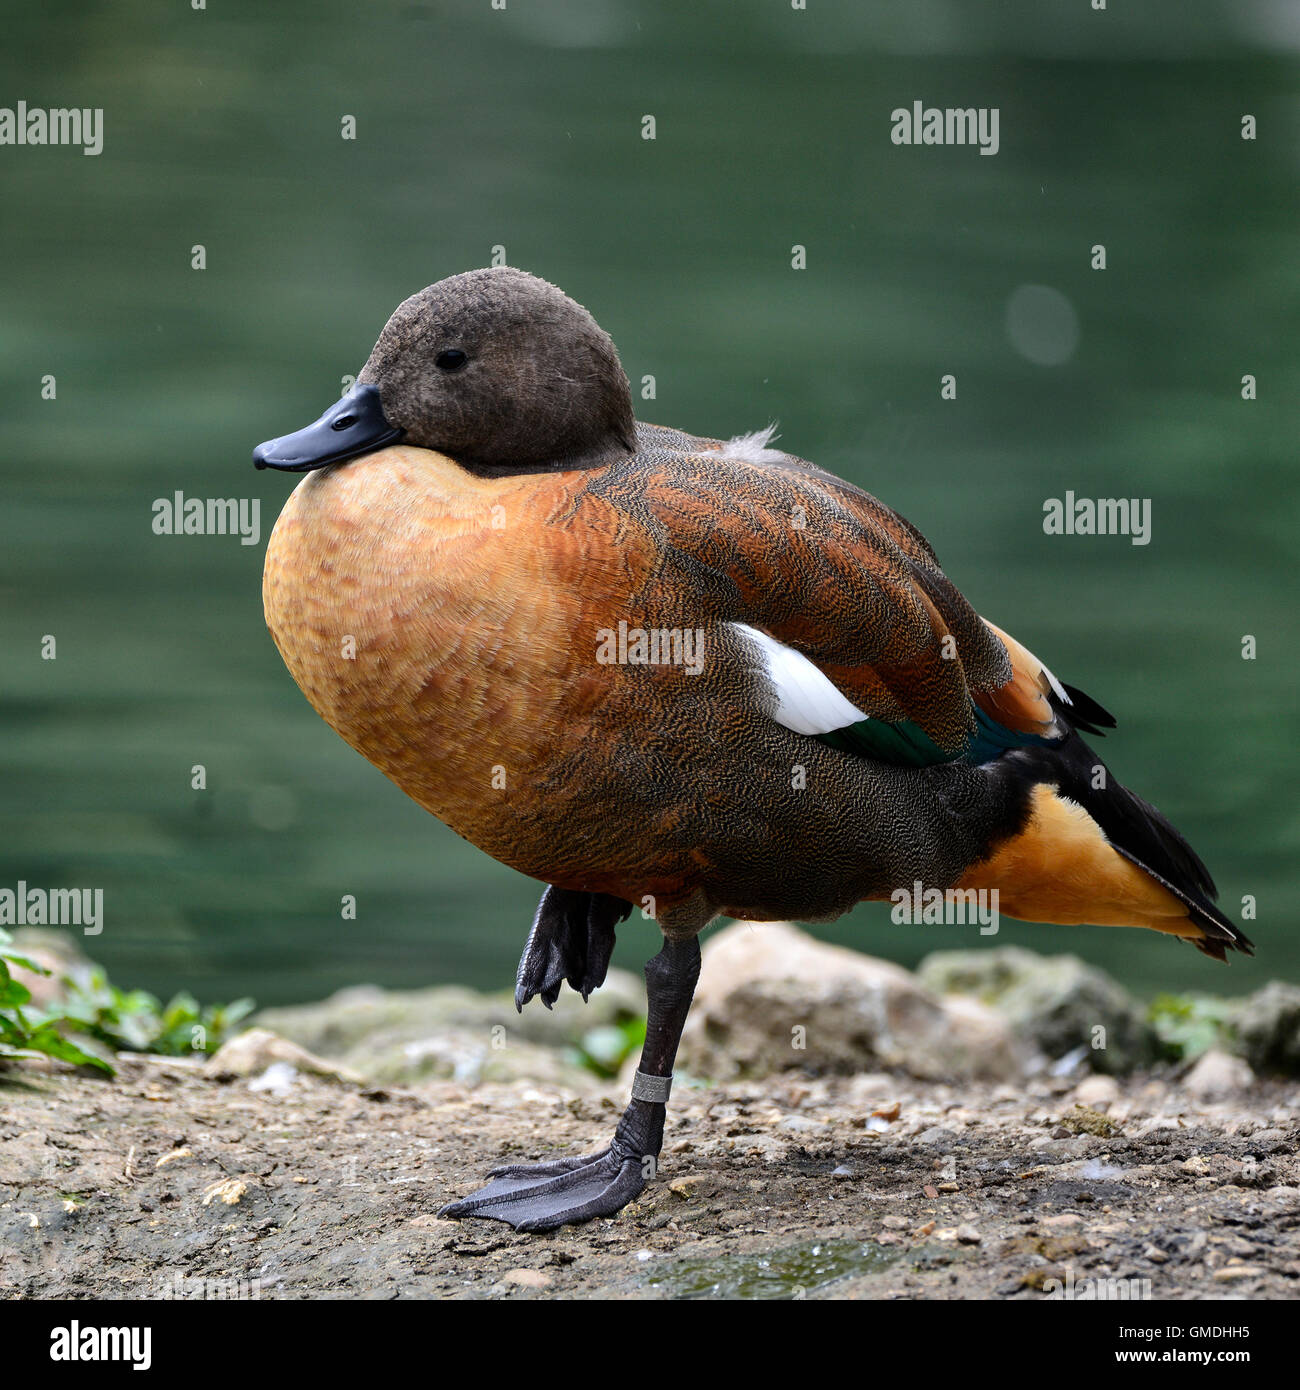 Beautiful portrait of South African Shelduck in pond landscape Stock Photo